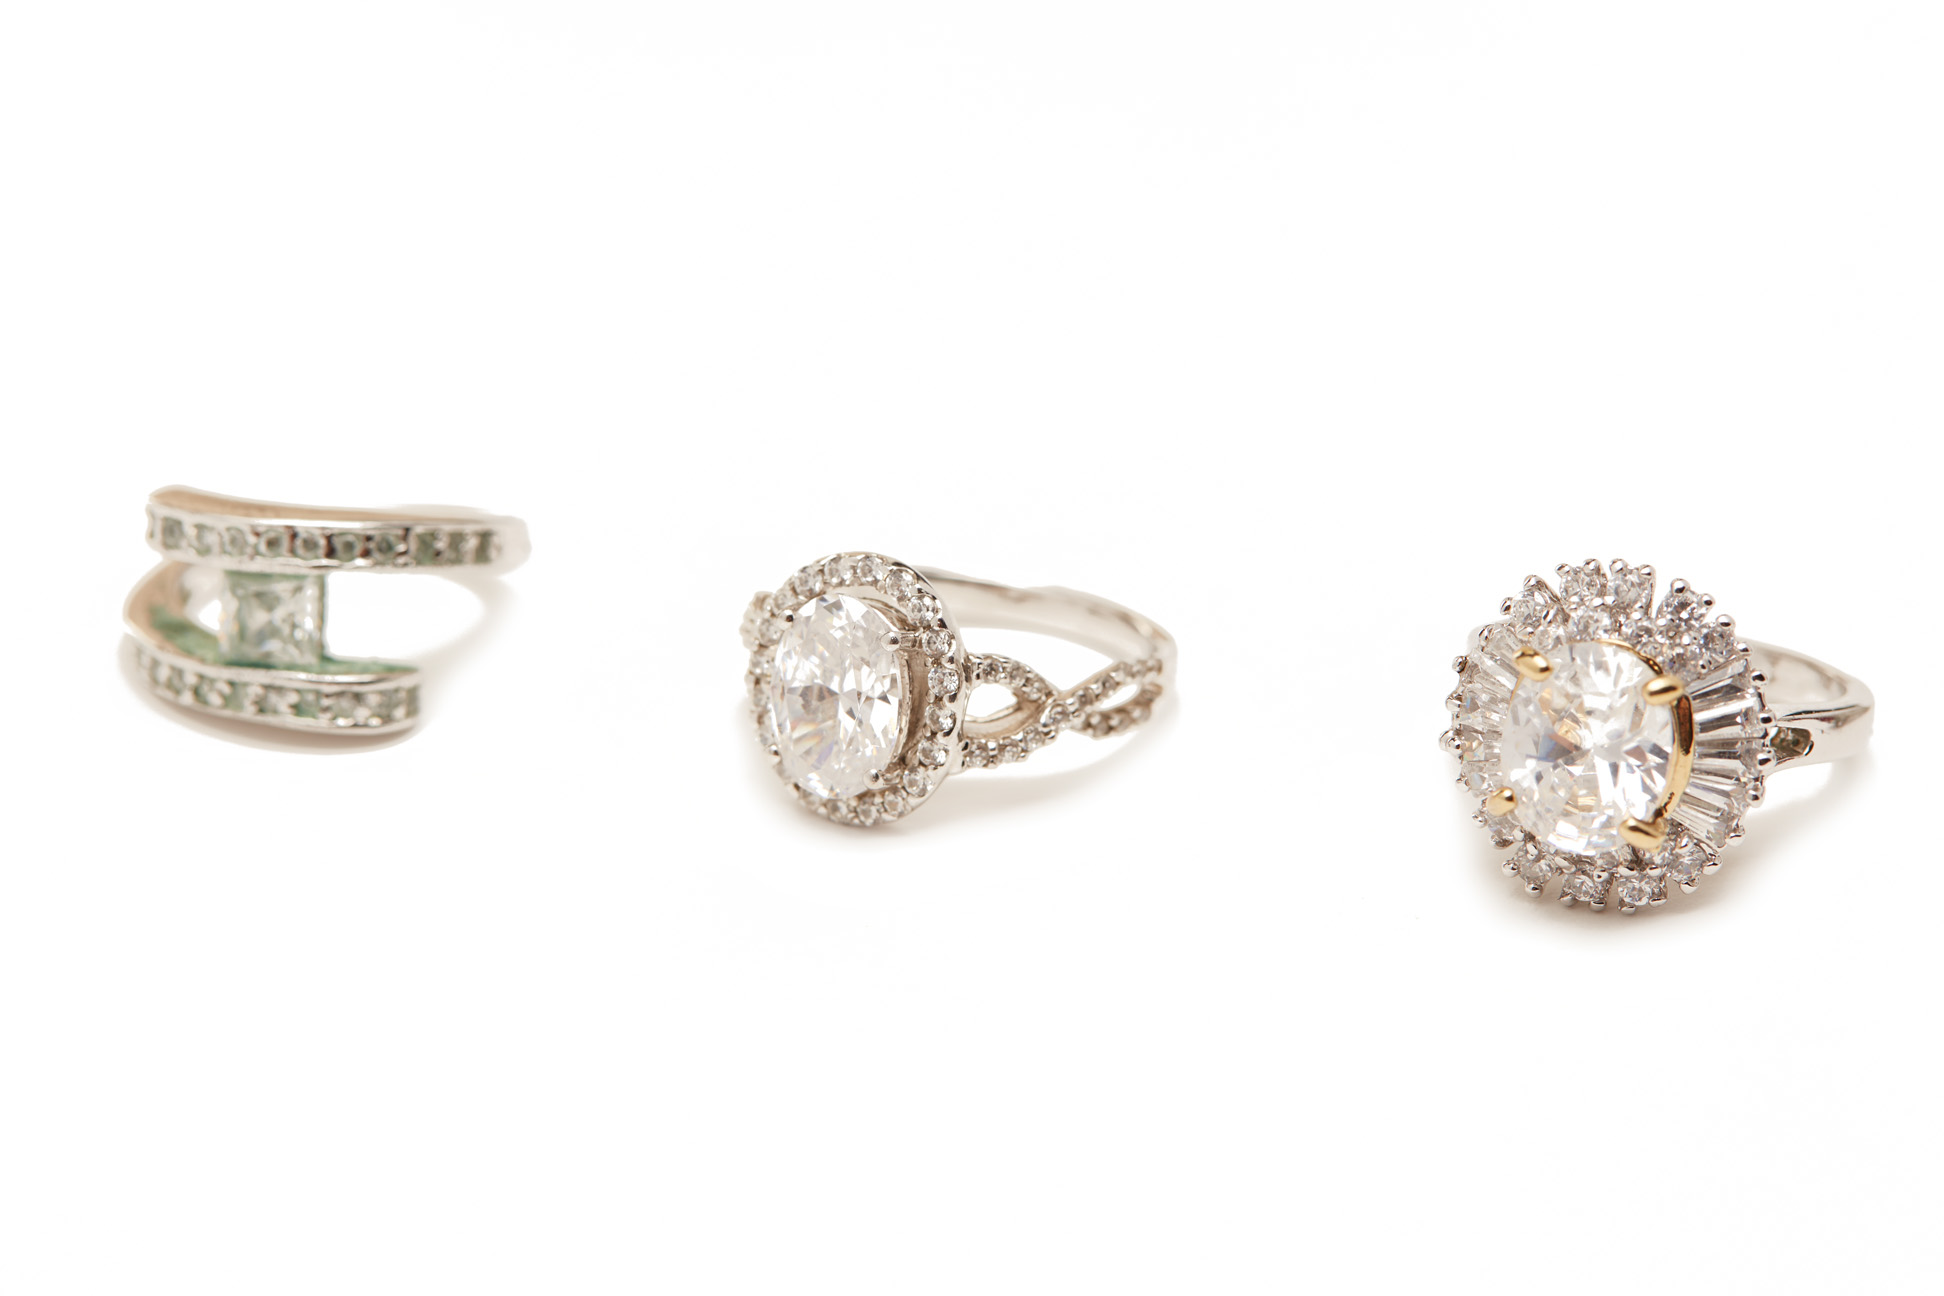 SIX DIAMANTÉ EMBELLISHED RINGS - Image 2 of 6